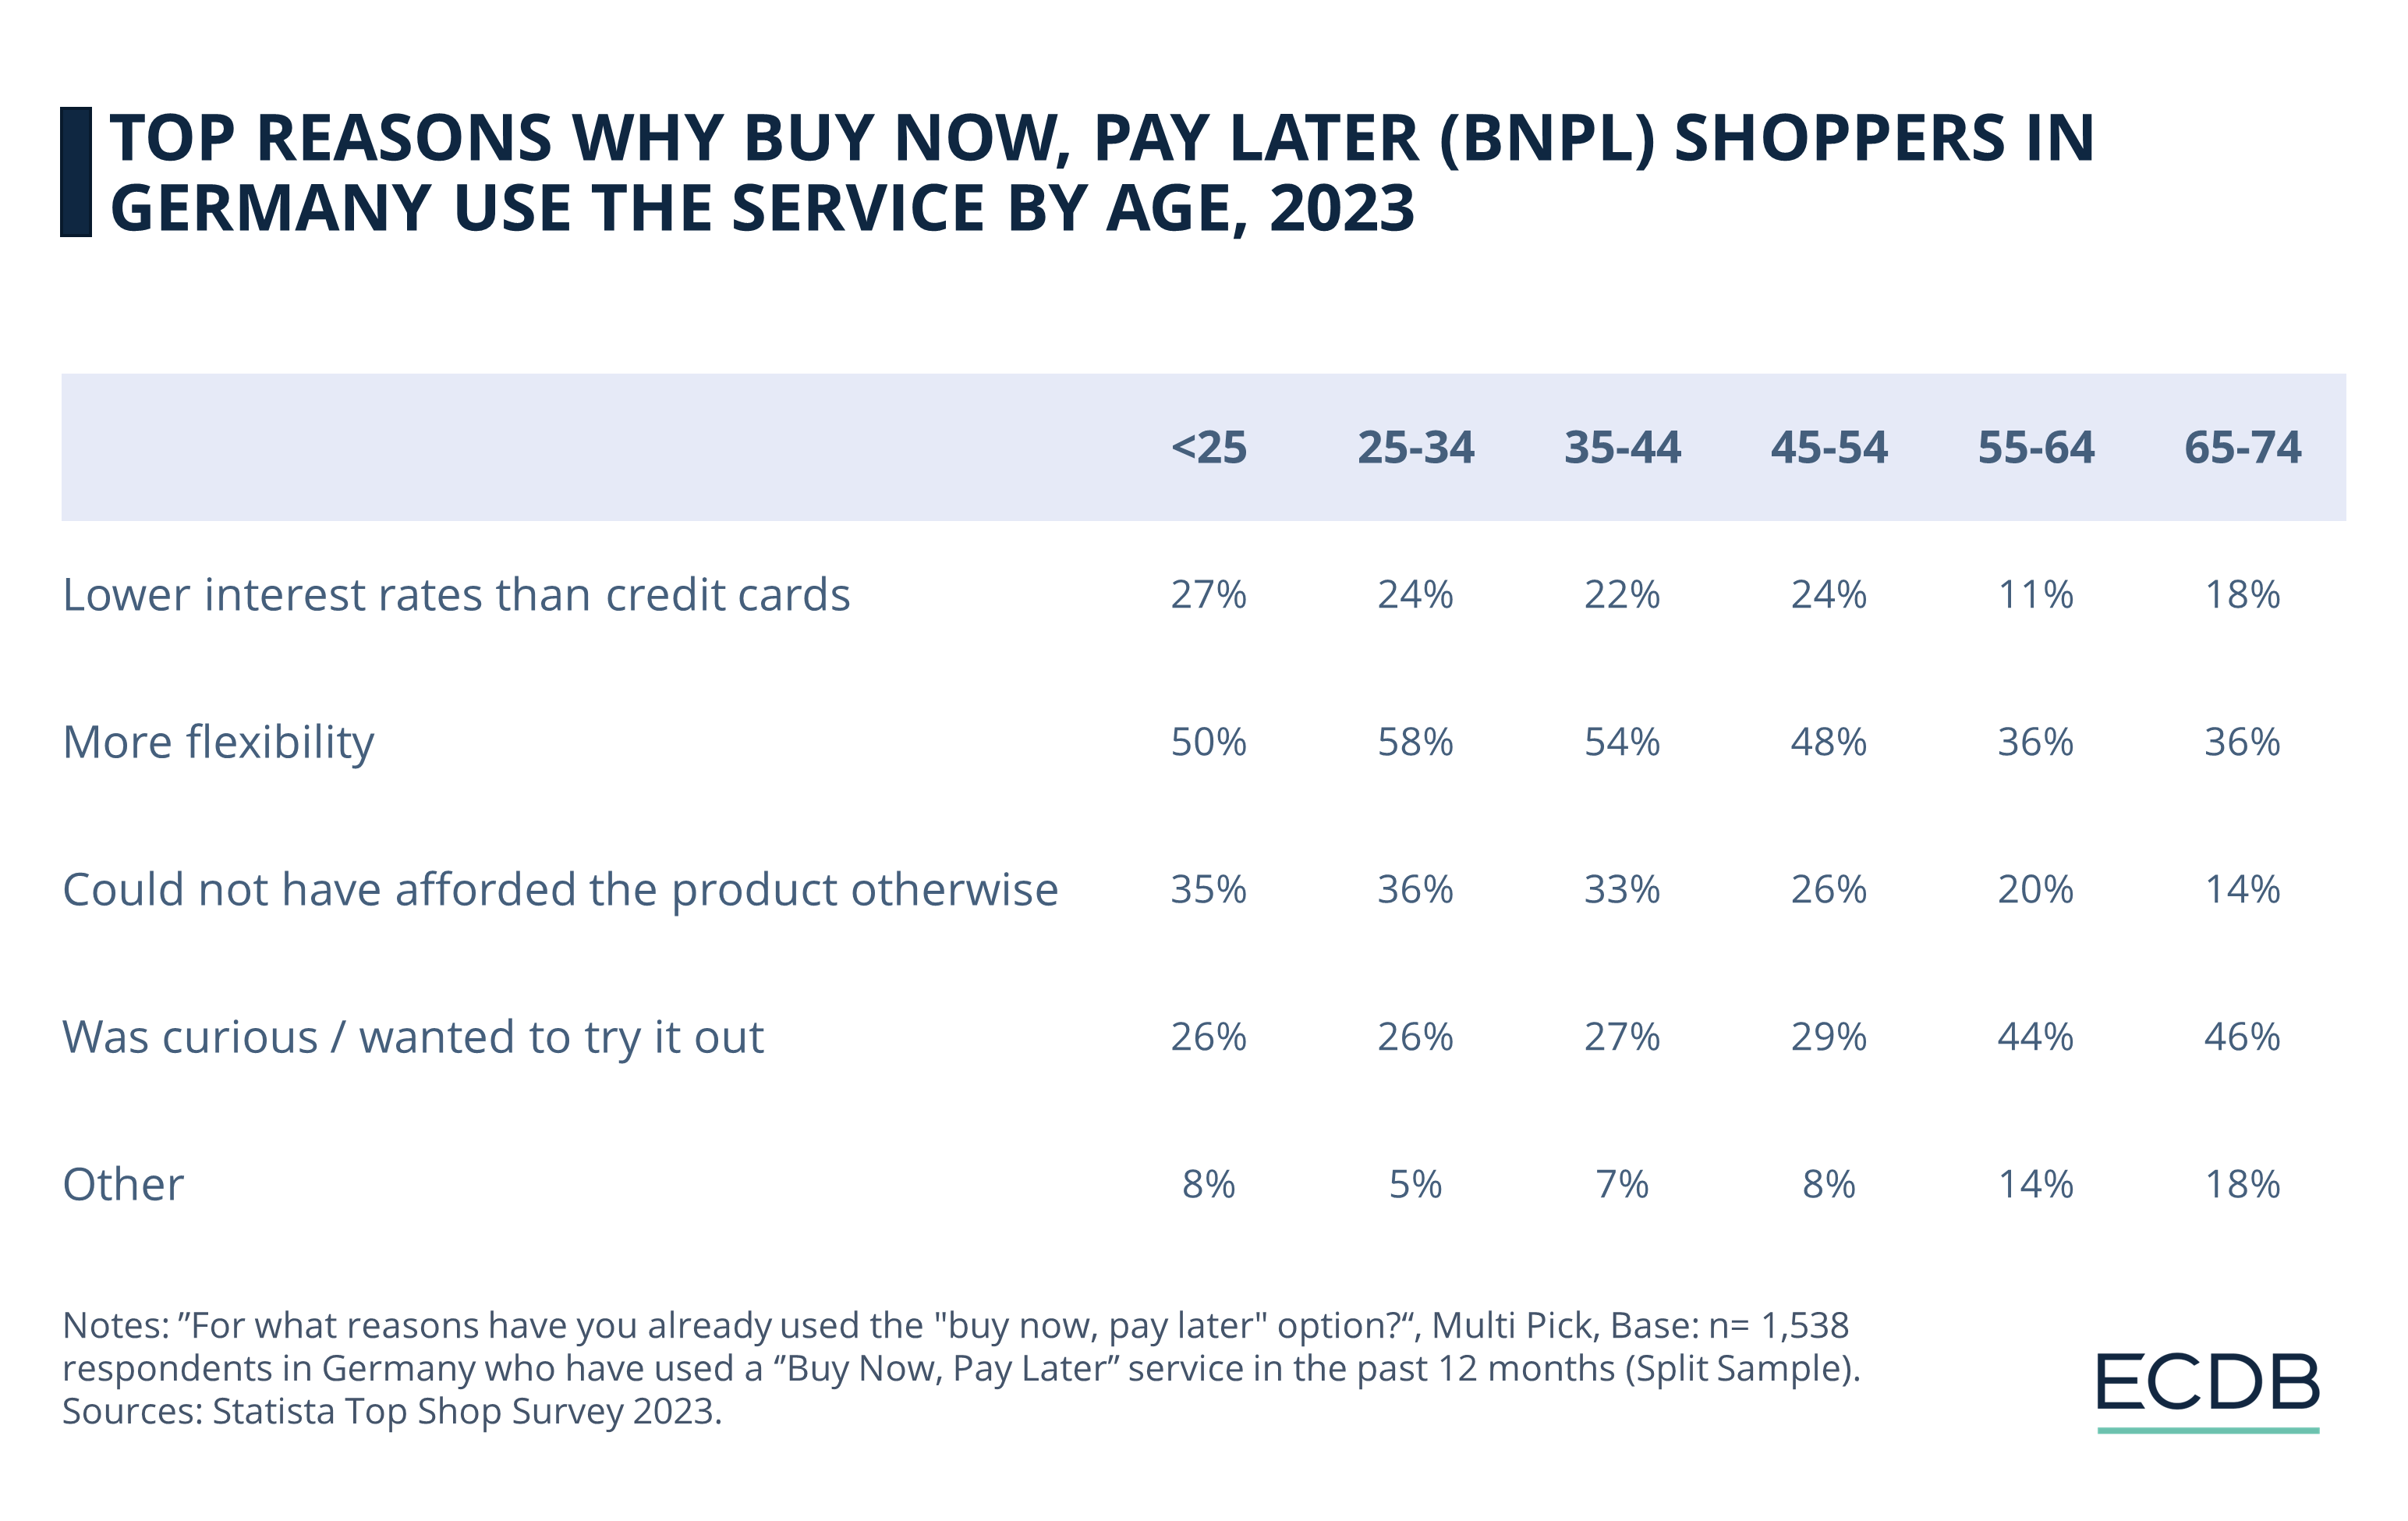 Top Reasons Why Buy Now, Pay Later (BNPL) Shoppers in Germany Use the Service by Age, 2023